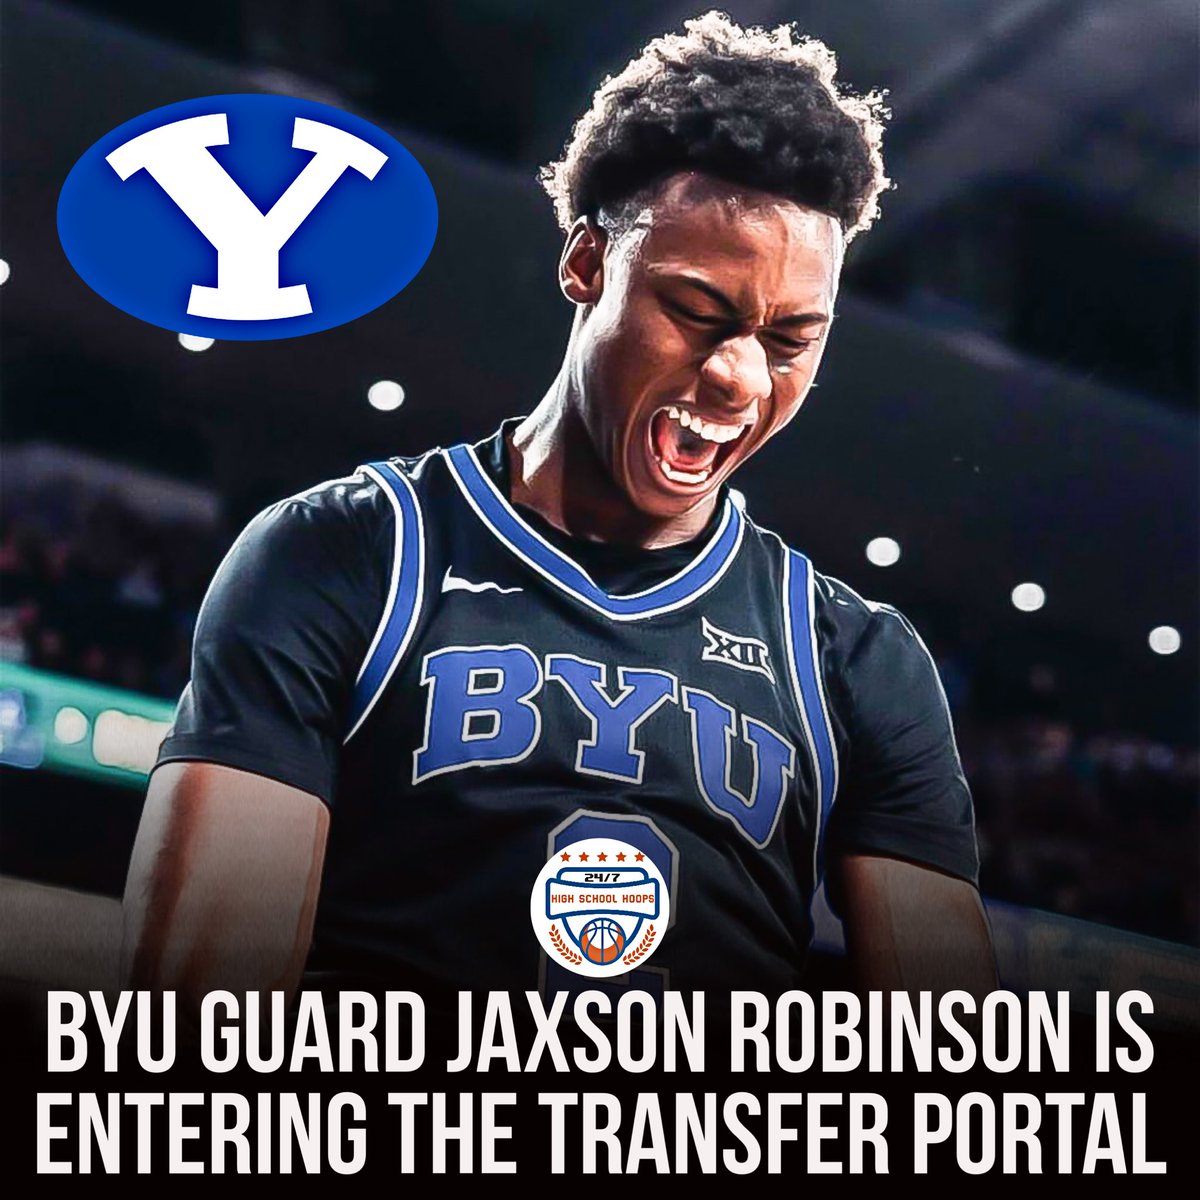 NEWS: BYU guard Jaxson Robinson is entering the transfer portal, per @jeffborzello and @DraftExpress. Robinson began his career playing one season at Texas A&M before playing one at Arkansas and then two at BYU. He was the Big 12 6MOY this season. He averaged 14.2PPG, 2.5RPG…